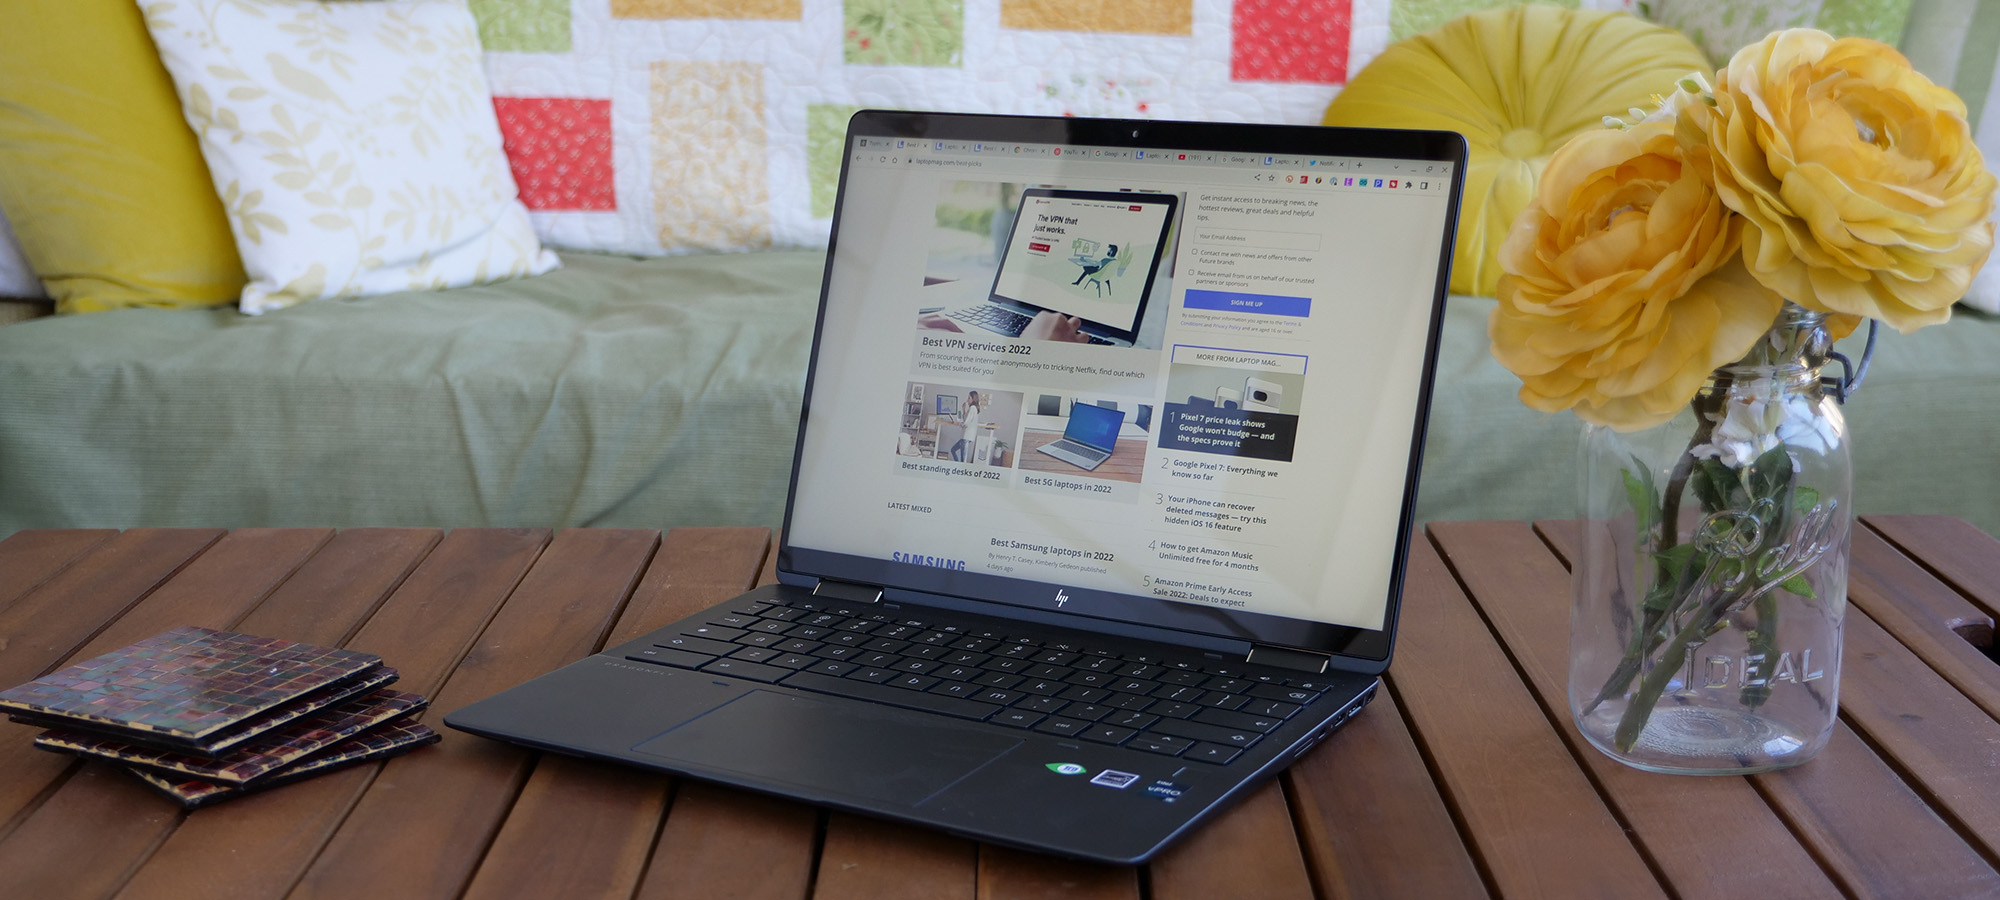 HP Elite Dragonfly Chromebook review: The corner office Chromebook